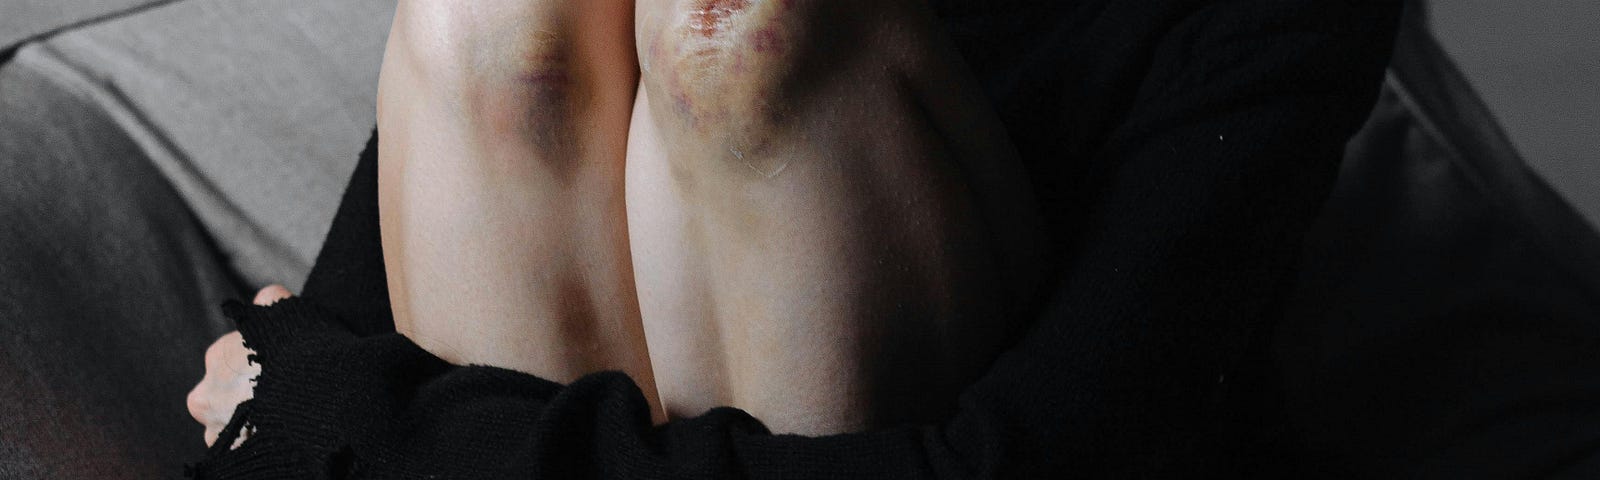 Young Woman with Bruises on Her Legs Sitting on a Sofa